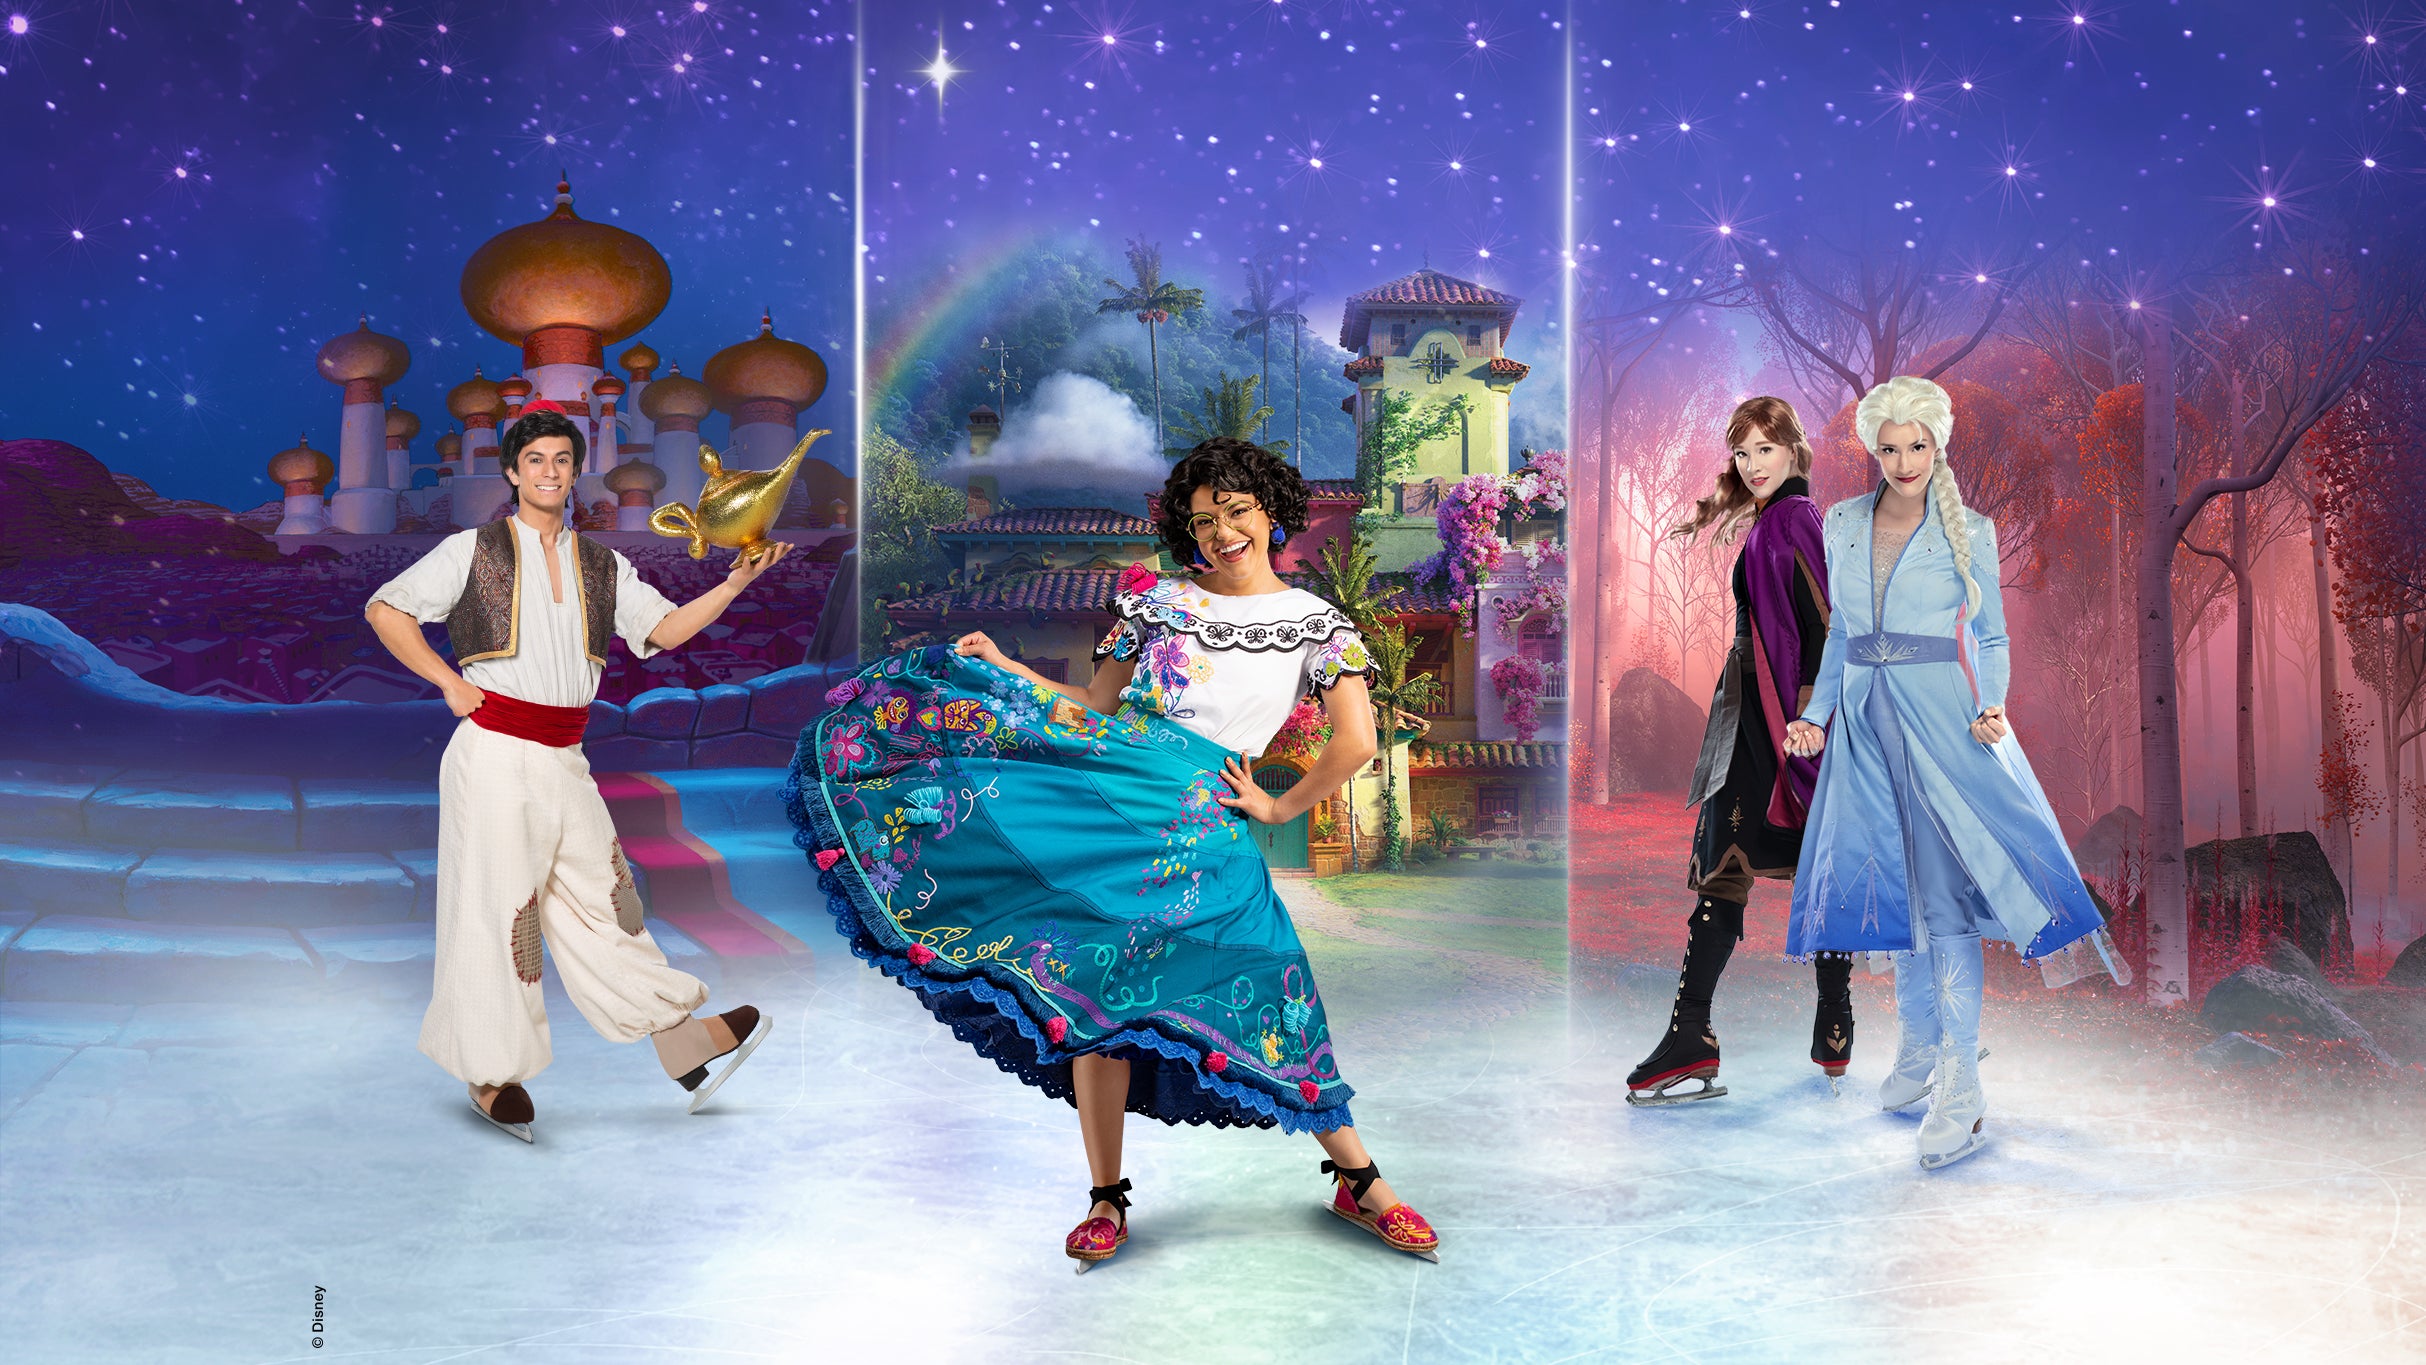 Disney On Ice presents Magic in the Stars free pre-sale listing for show tickets in Detroit, MI (Little Caesars Arena)